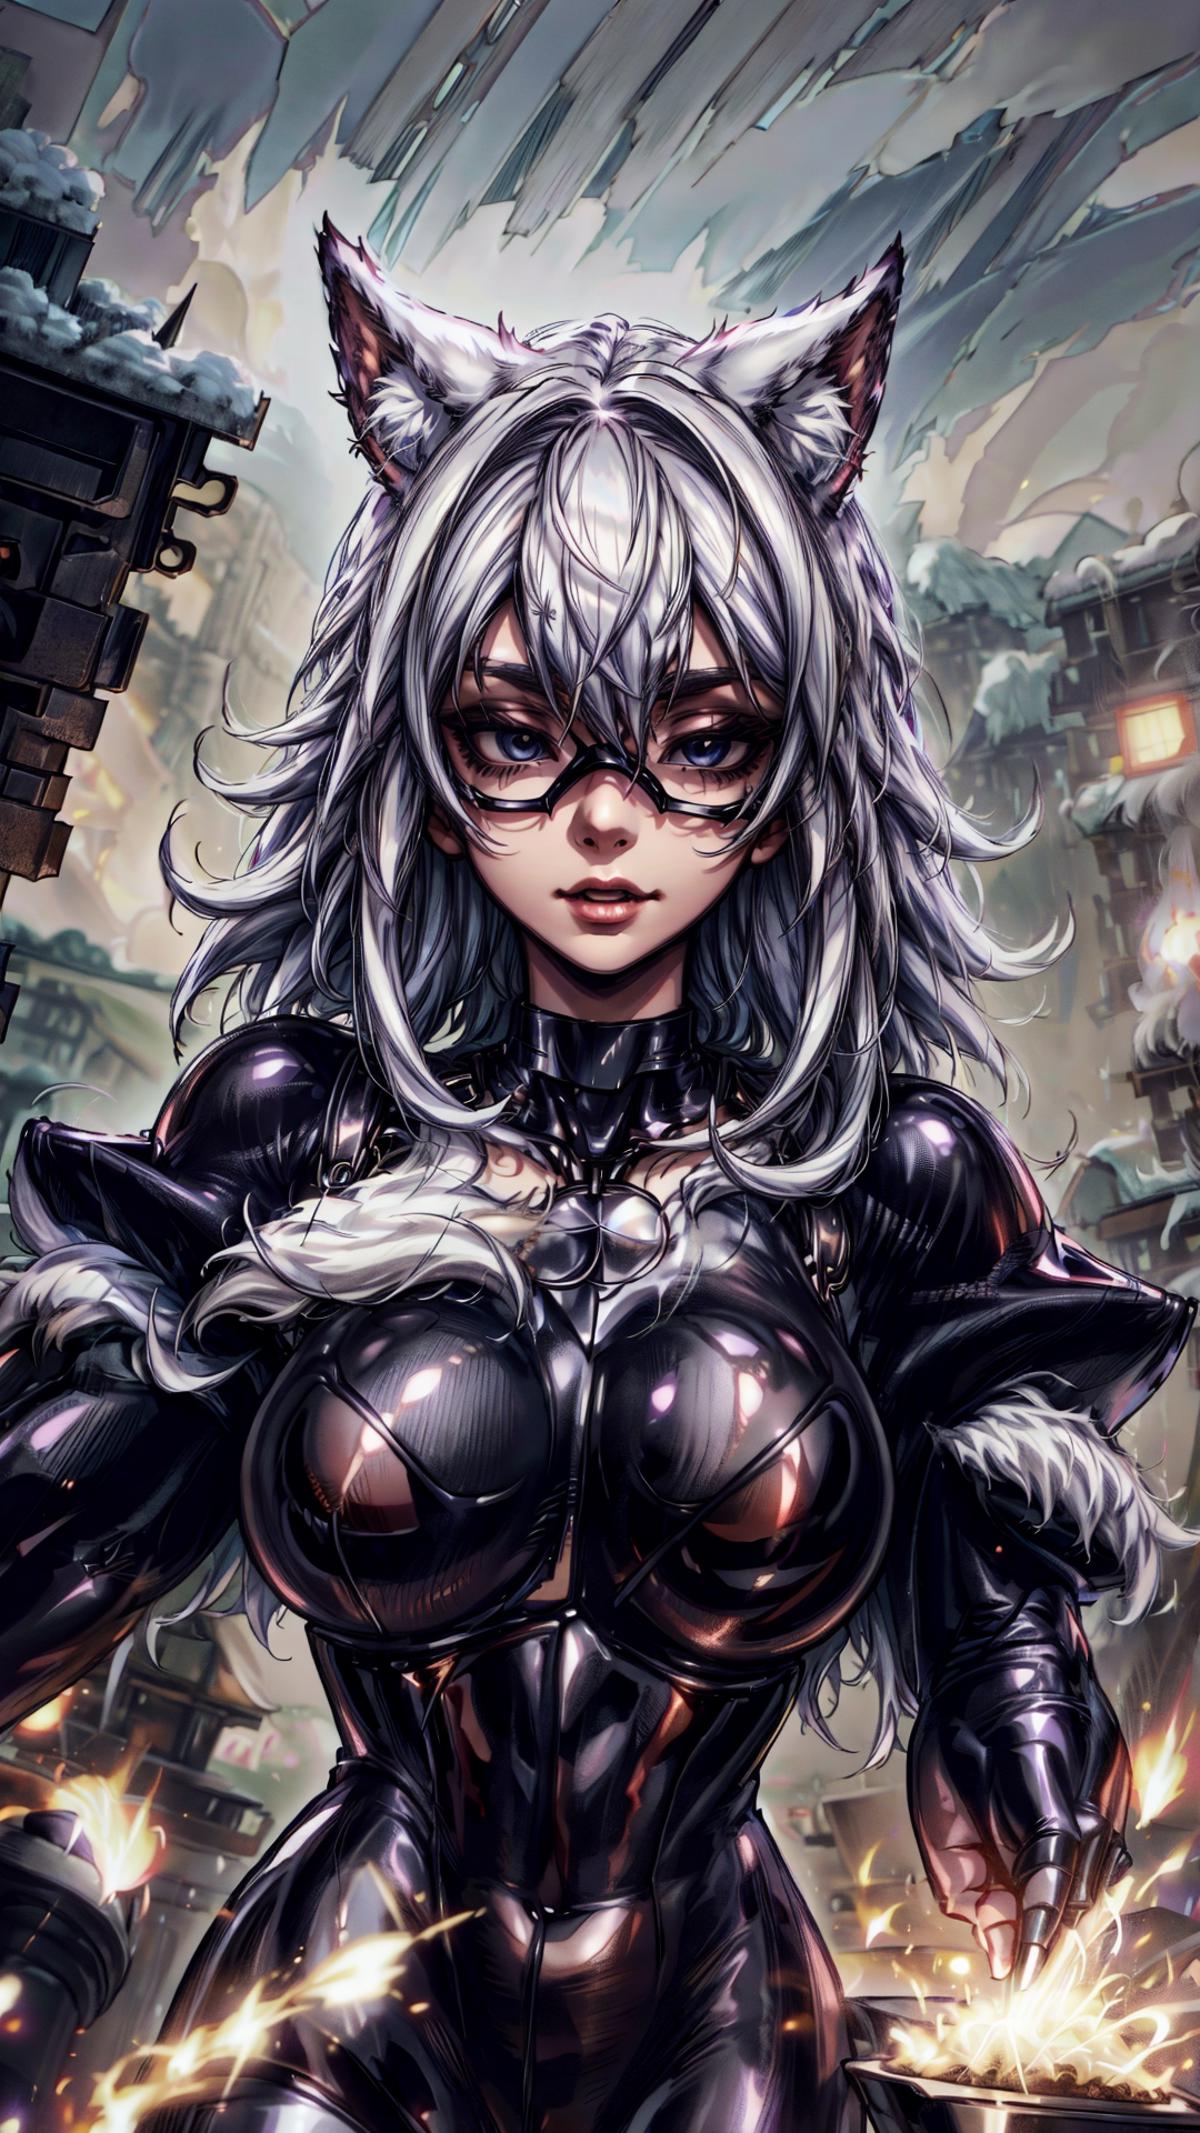 Felicia Hardy (Black Cat) from Spider Man image by HC94